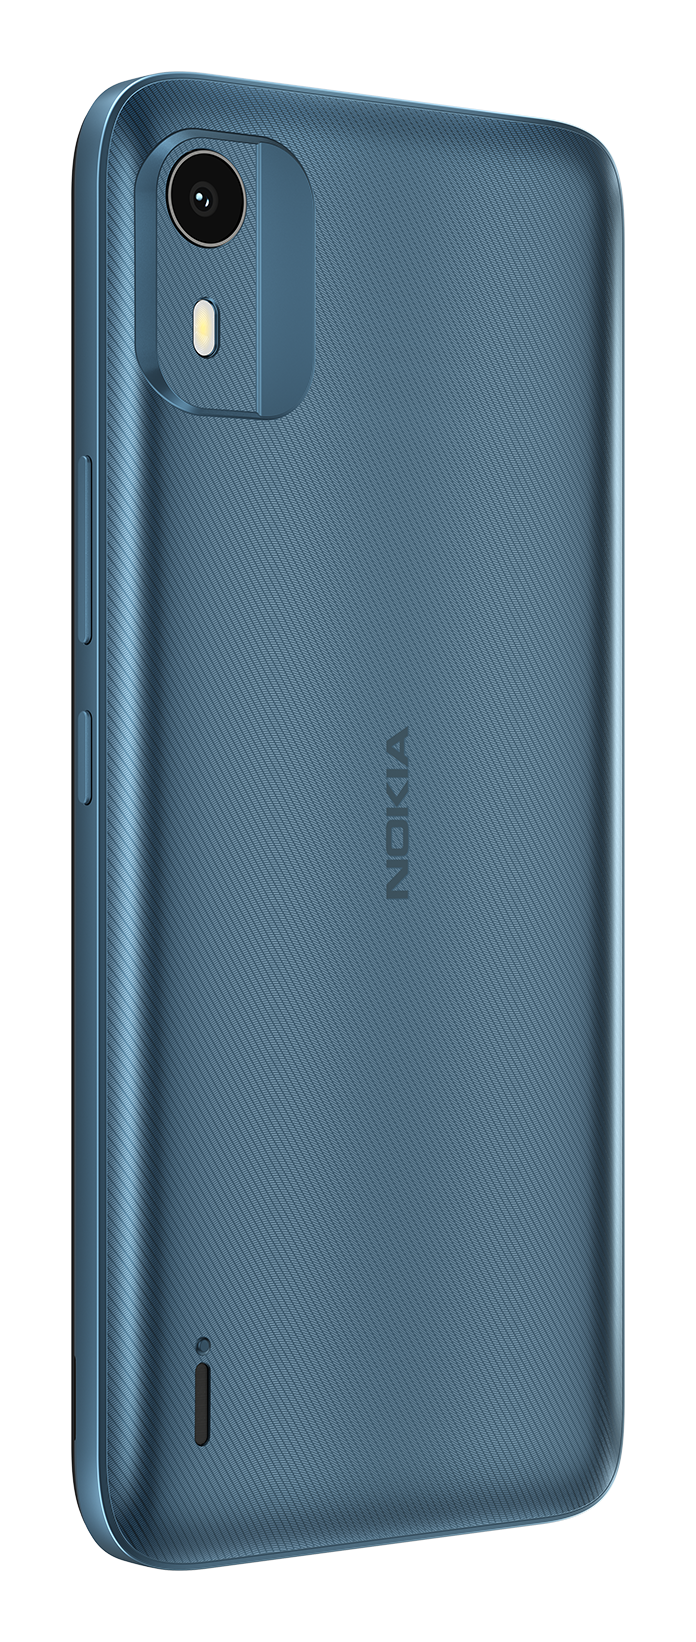 Nokia C12 blue bacl side